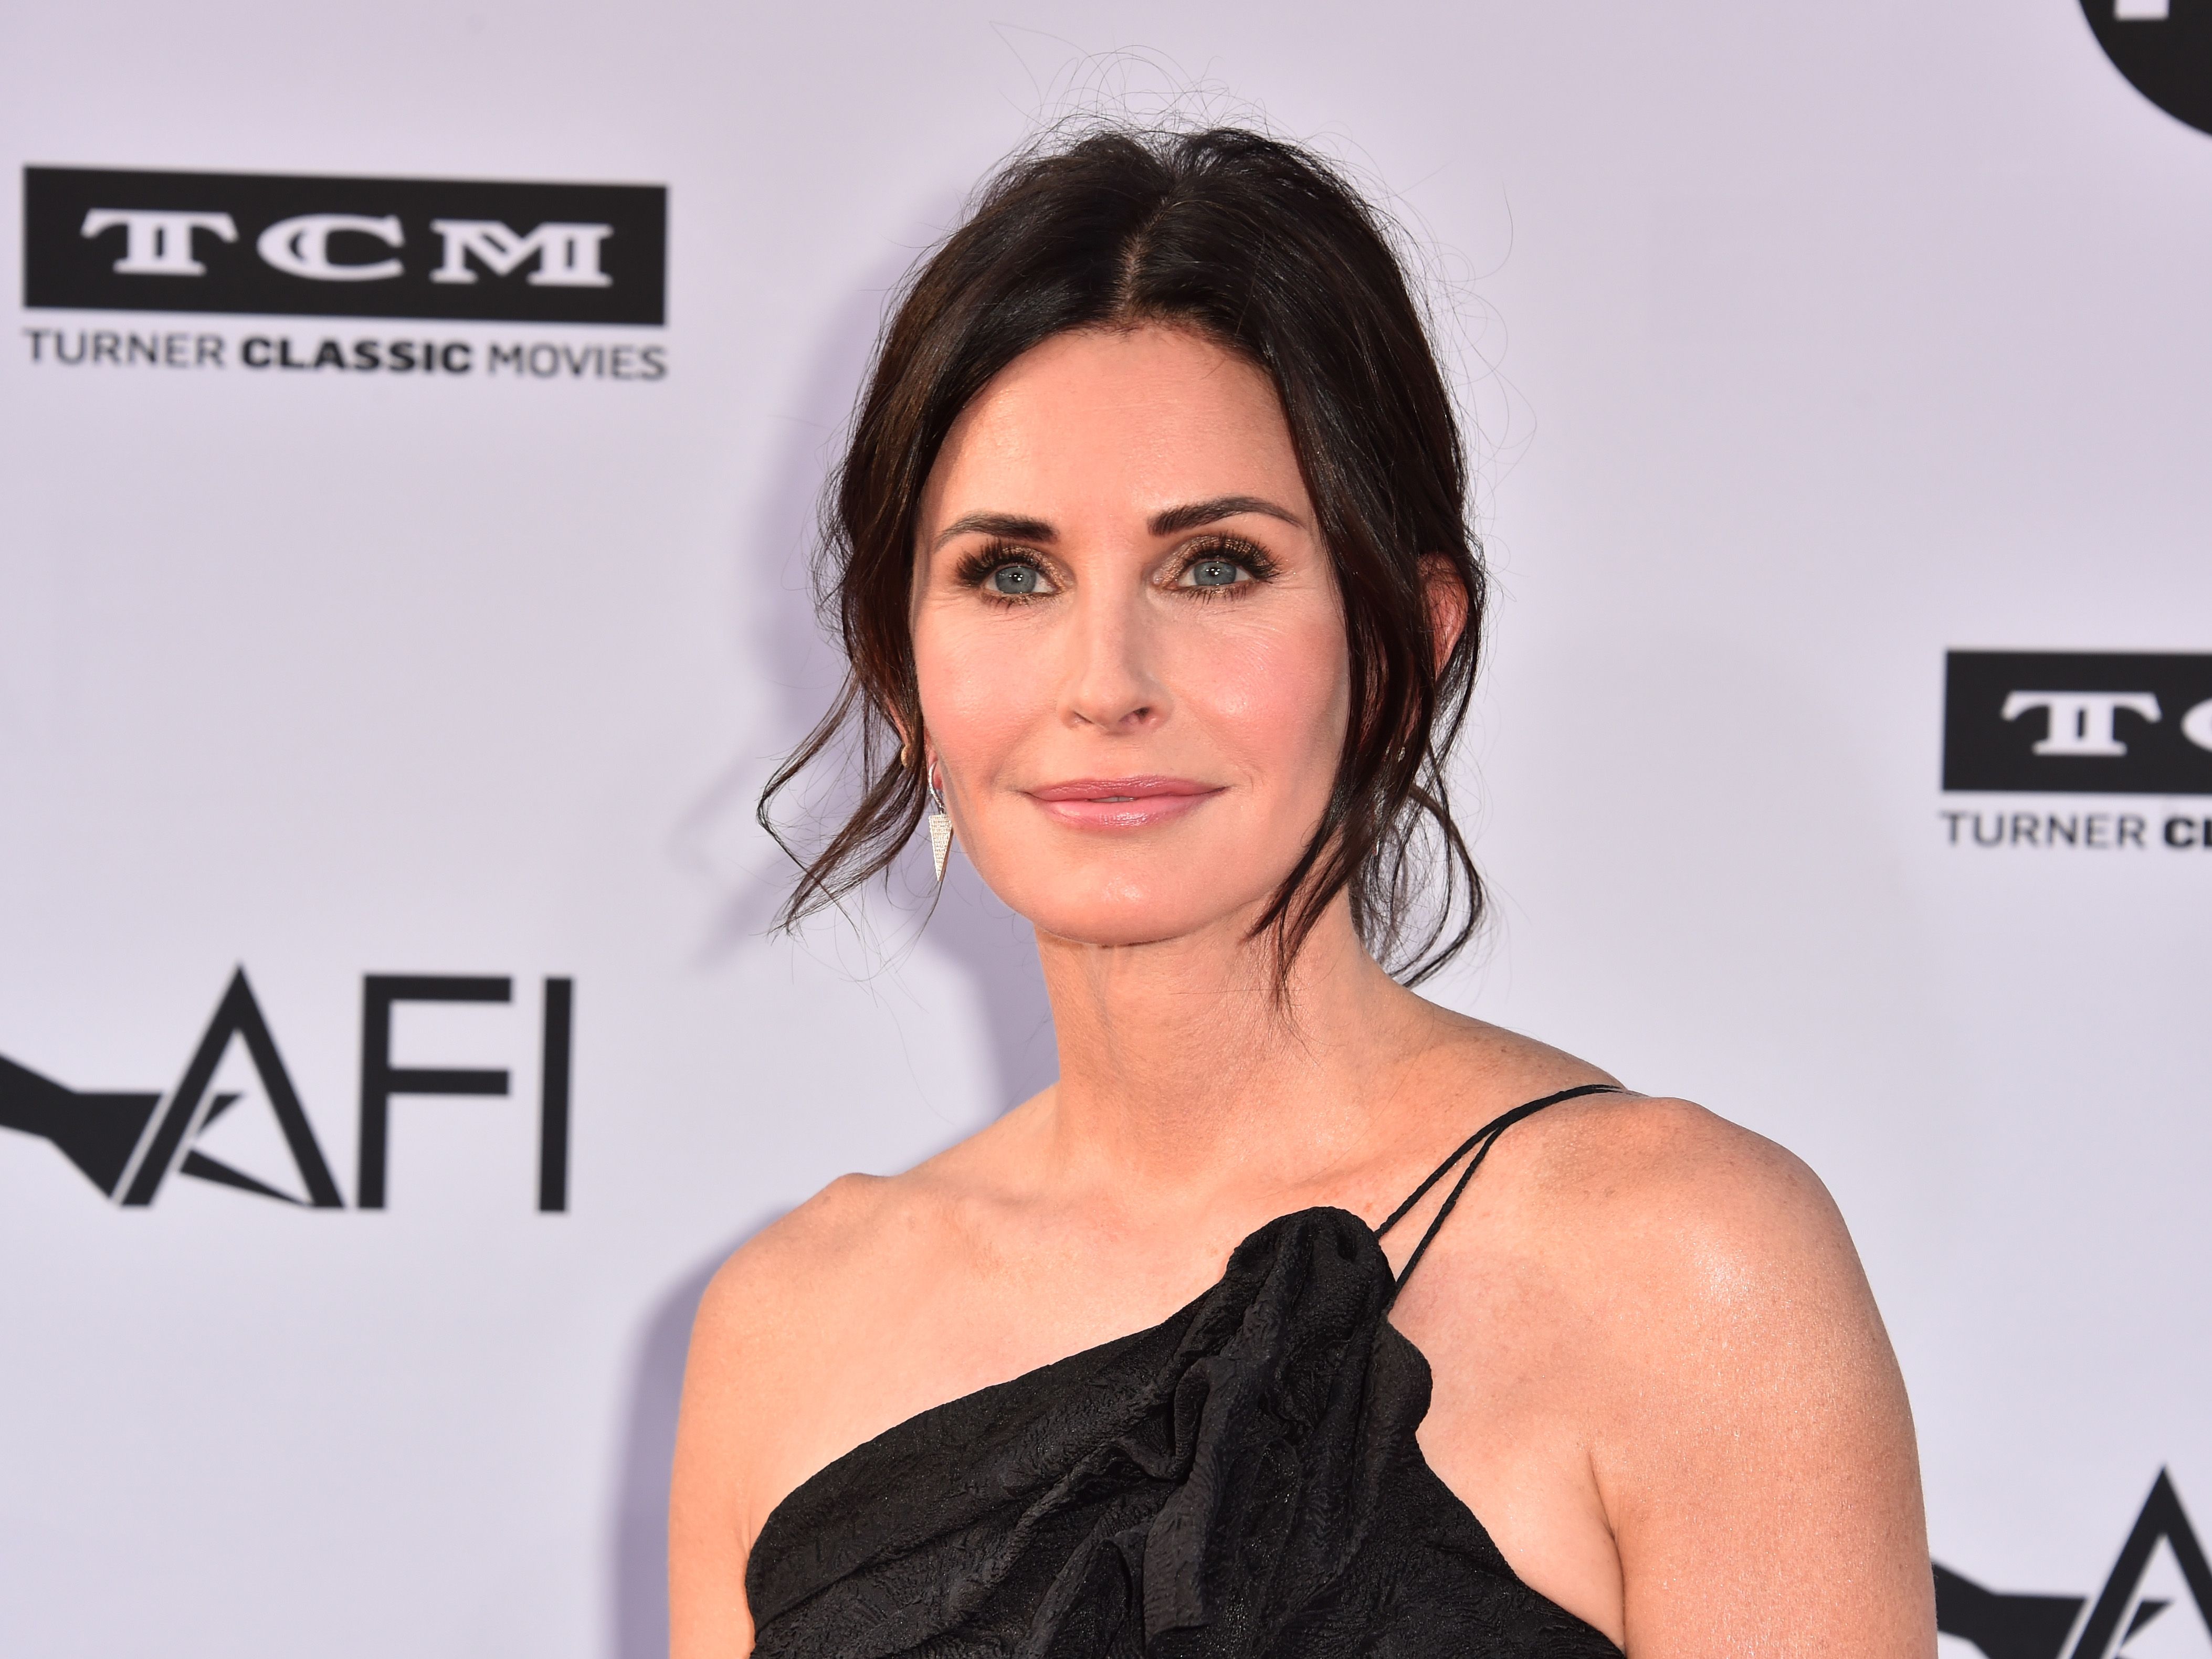 Courteney Cox at the American Film Institute's 46th Life Achievement Award Gala in 2018 | Source: Getty Images